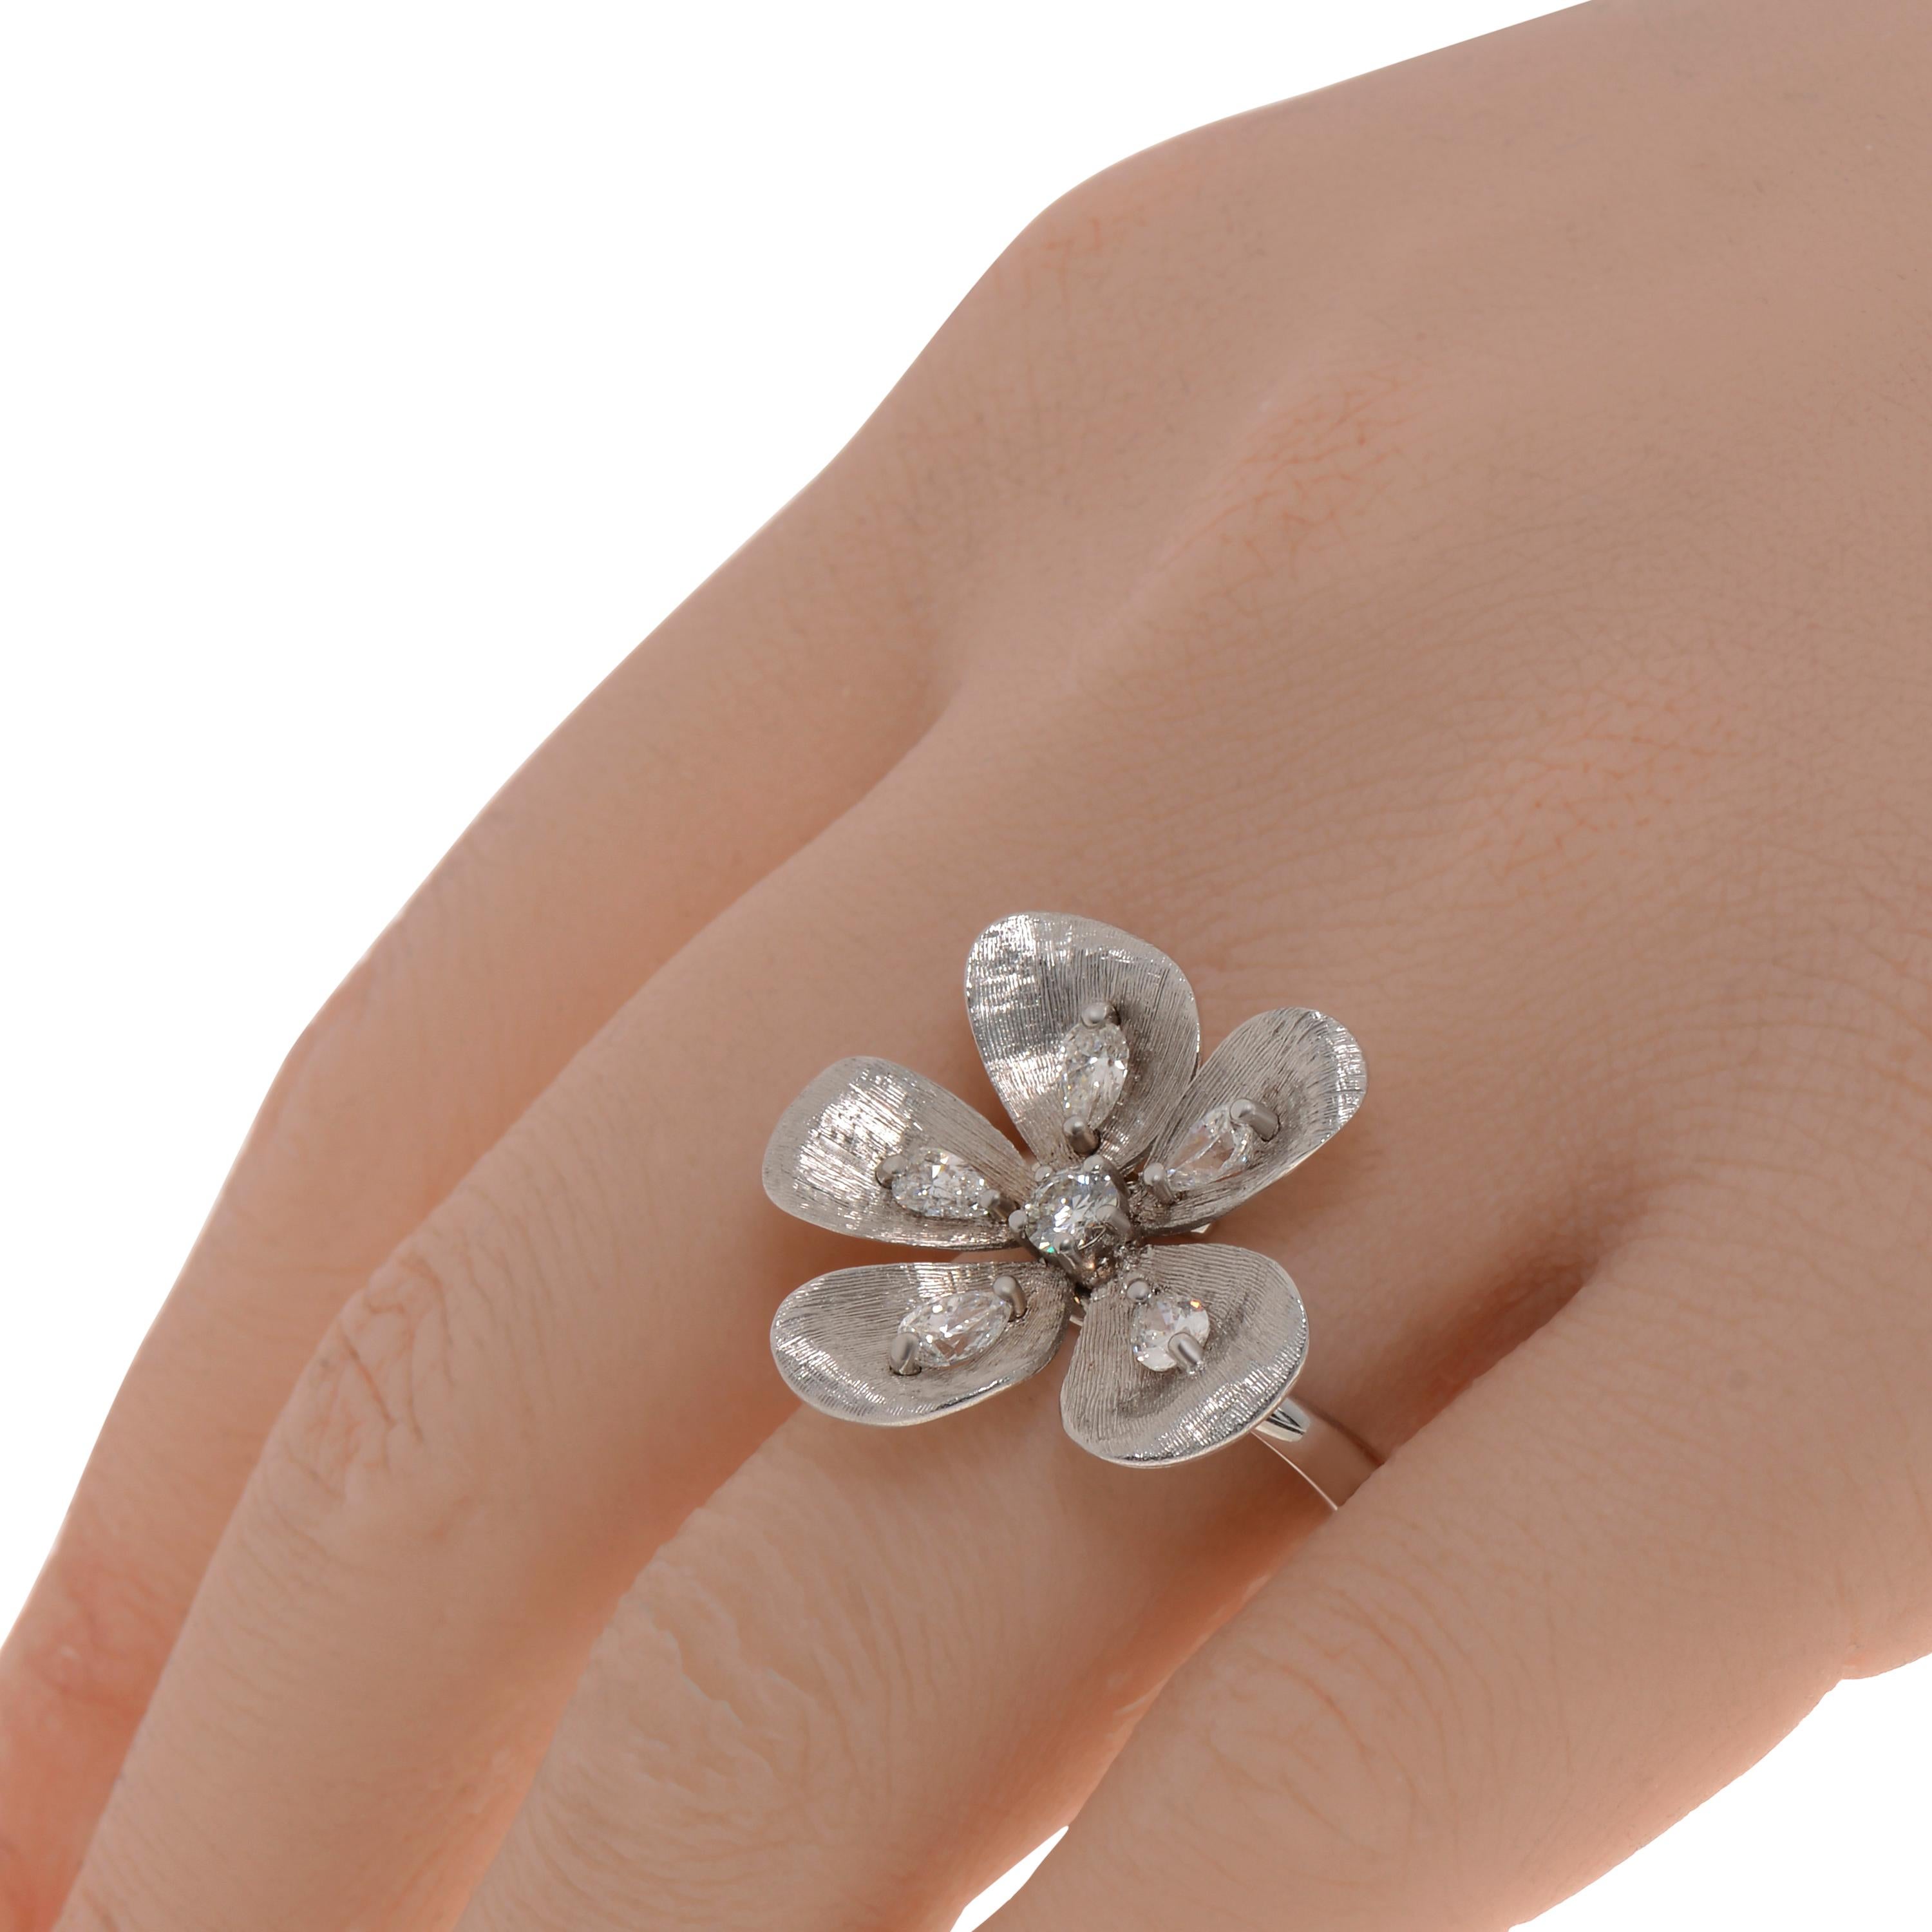 This bold Piero Milano 18K White Gold Cocktail Ring features a brilliant, center diamond surrounded by brushed gold petals with a teardrop diamond 0.92ct twd in the center of each petal on a polished white gold band. The ring size is 6.5. The